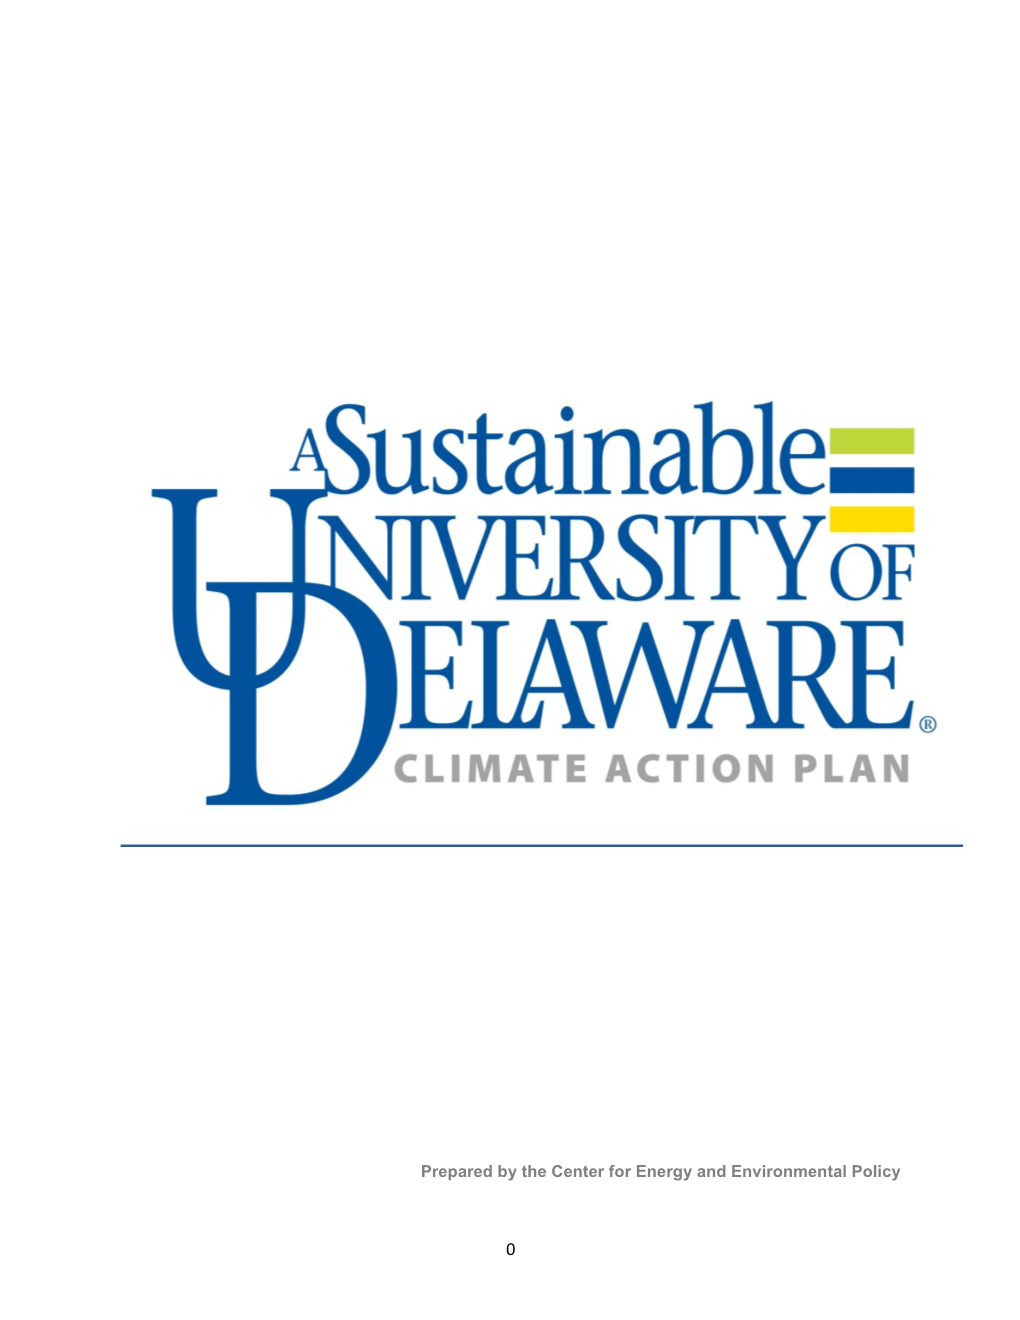 University of Delaware Climate Action Plan.Pdf